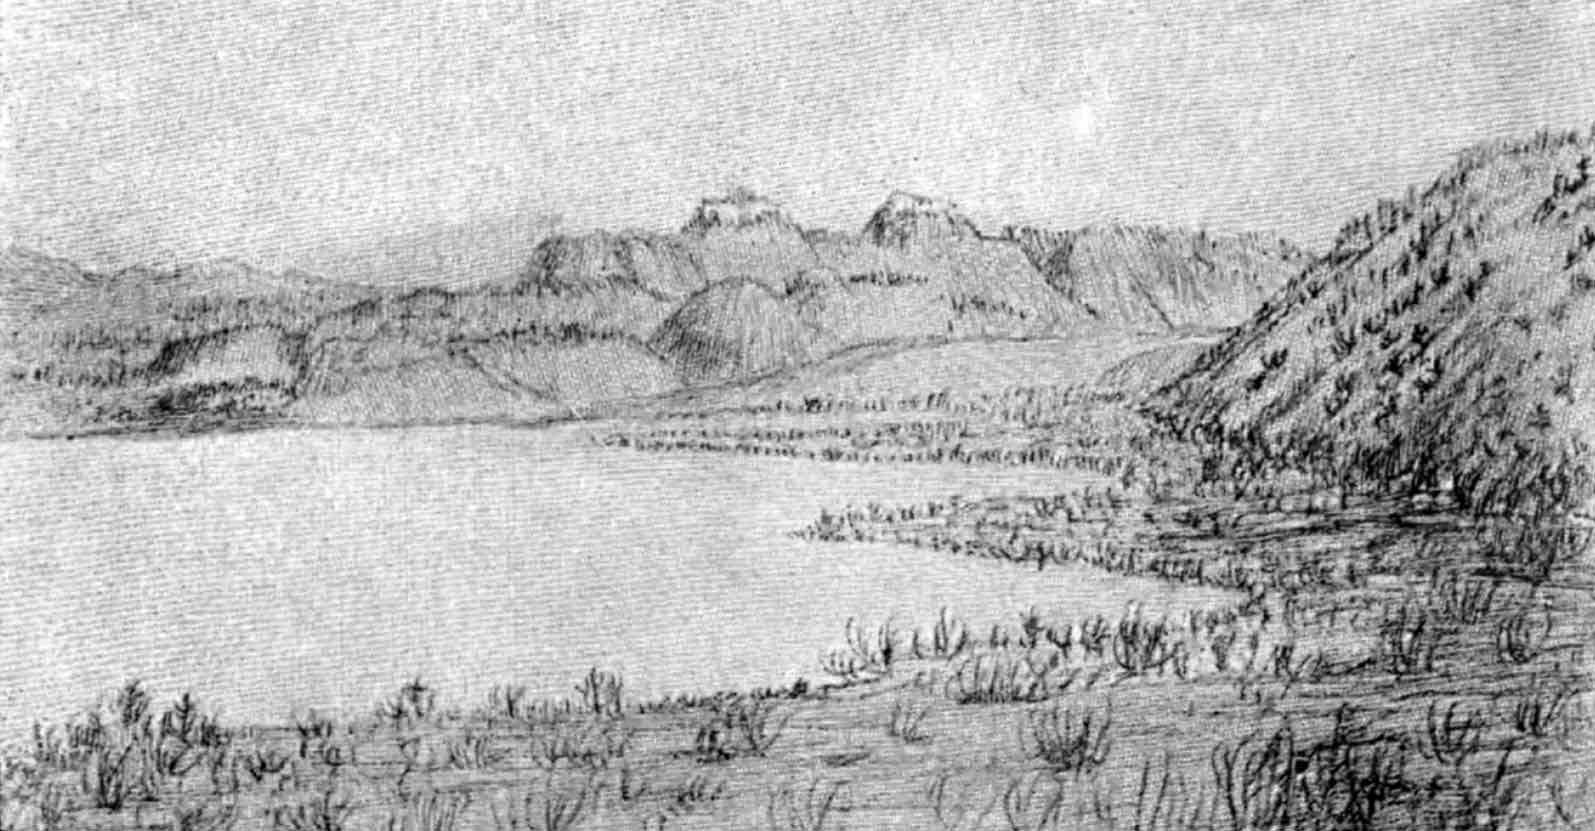 A sketch of a mountain lake surrounded by alpine vegetation and distant rolling hills, volcanic cones, and mountain peaks.